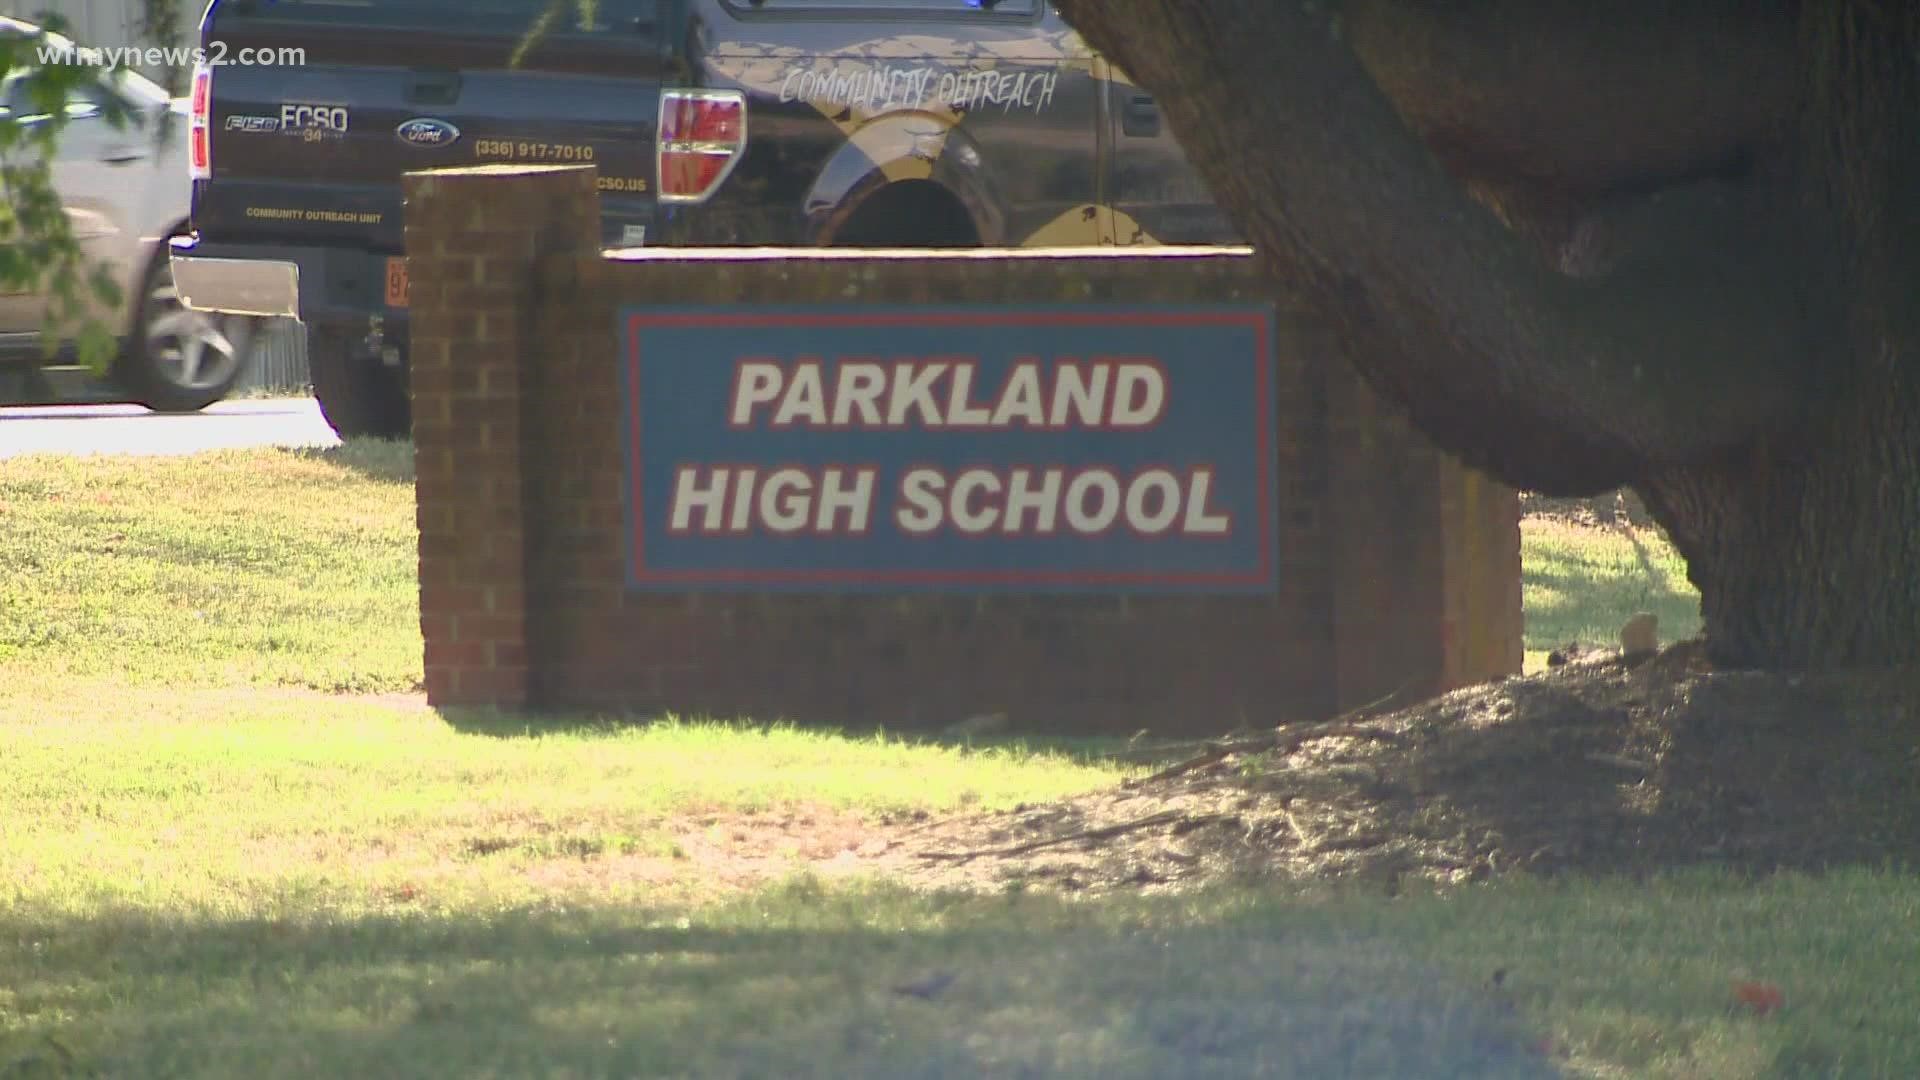 Parkland High School was placed on lockdown after school was dismissed as a precaution.